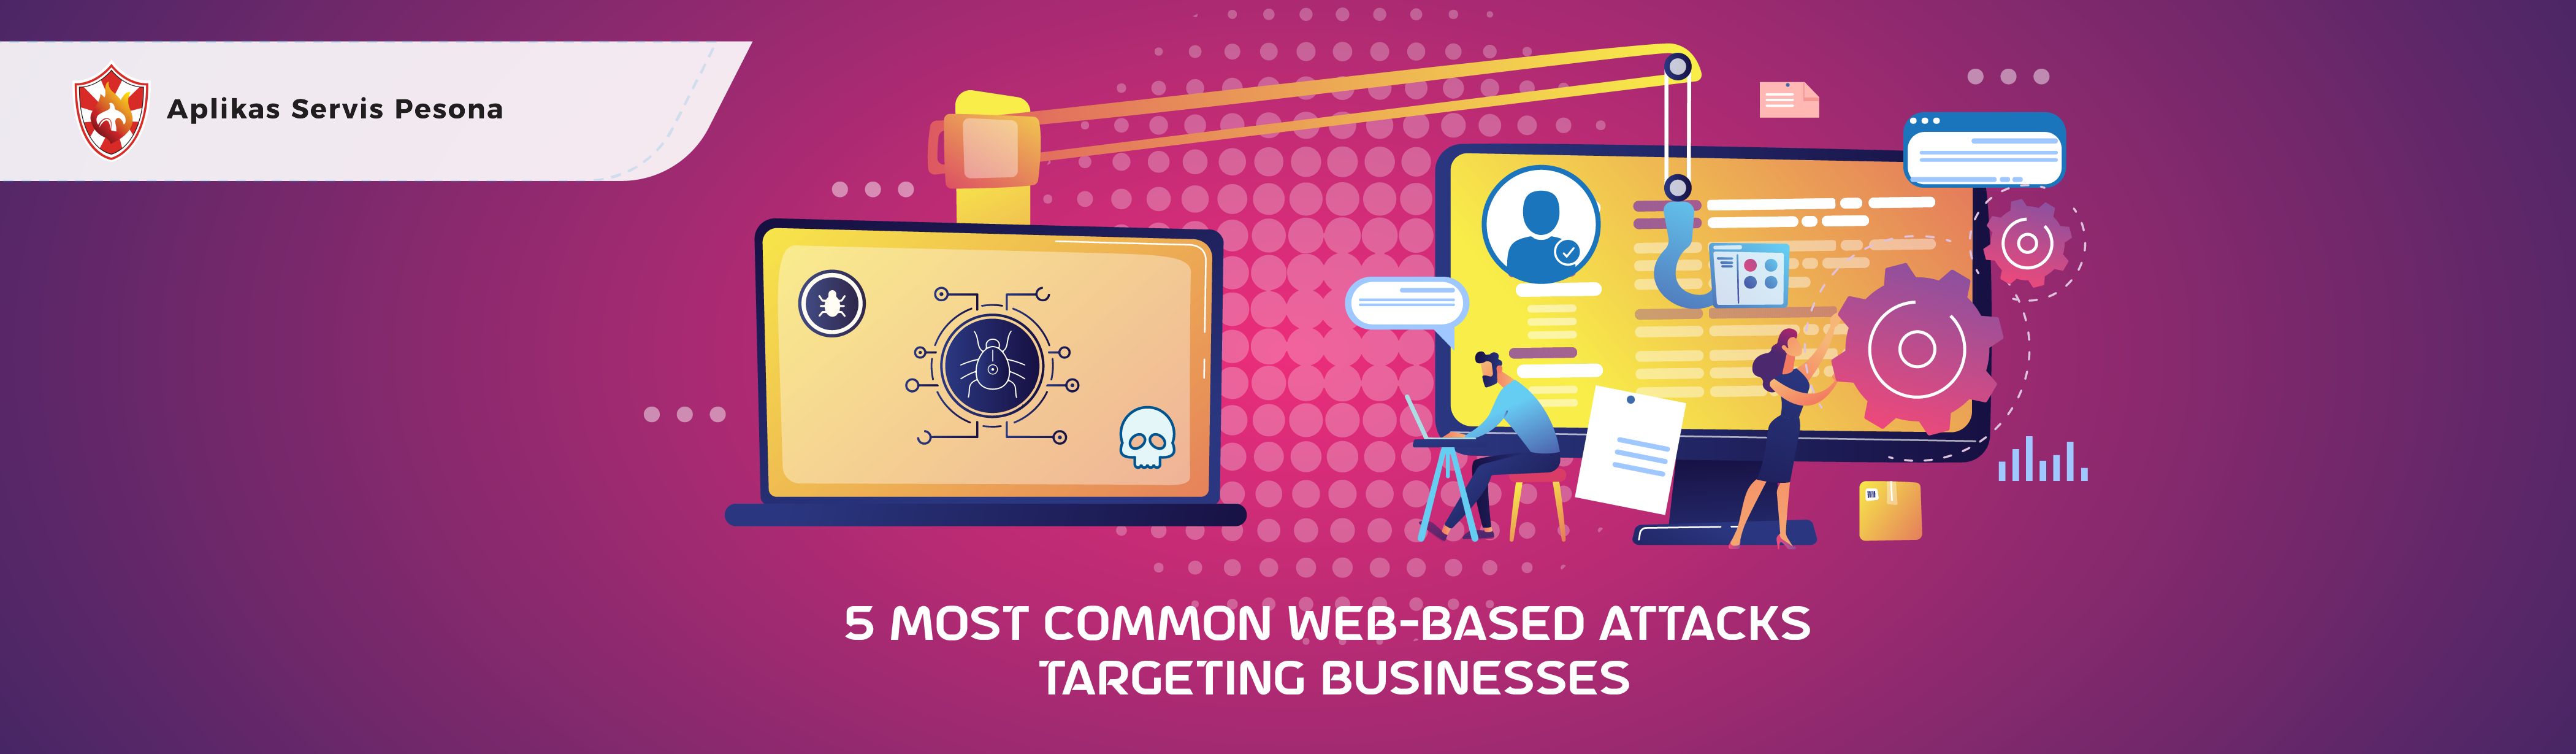 5 Most Common Web-Based Attacks Targeting Businesses